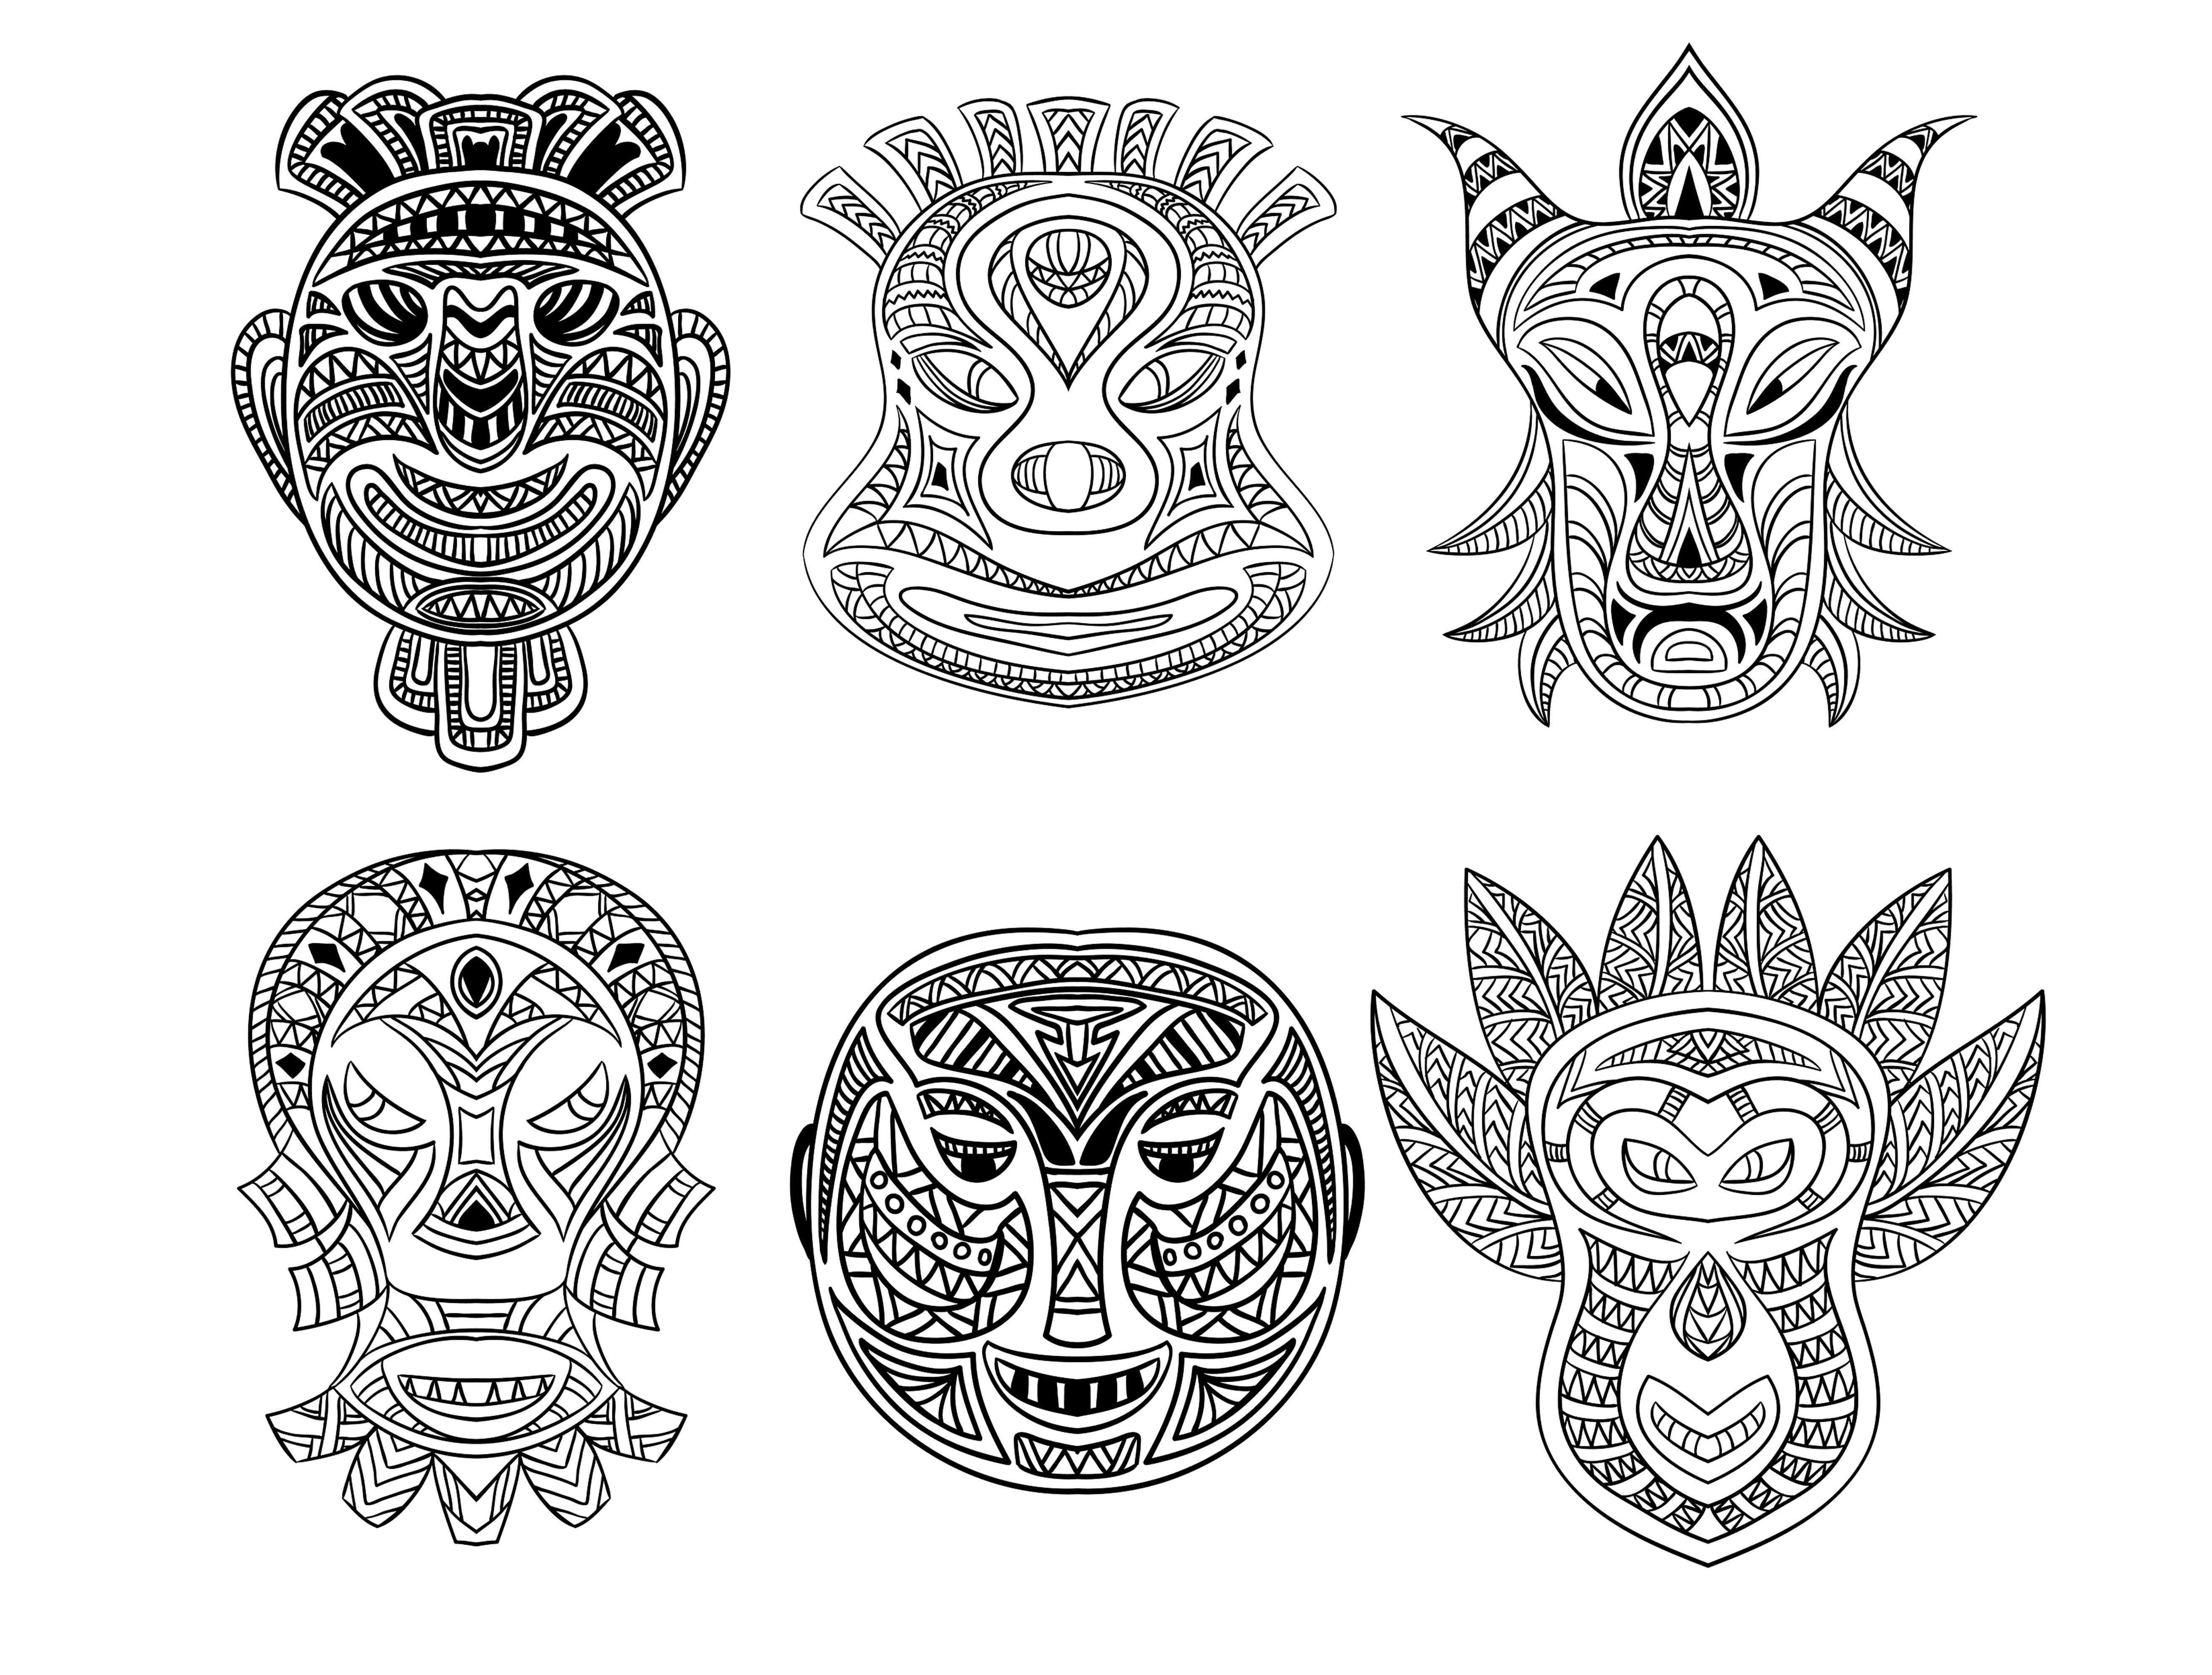 Six African masks to color. Masks in various shapes and patterns